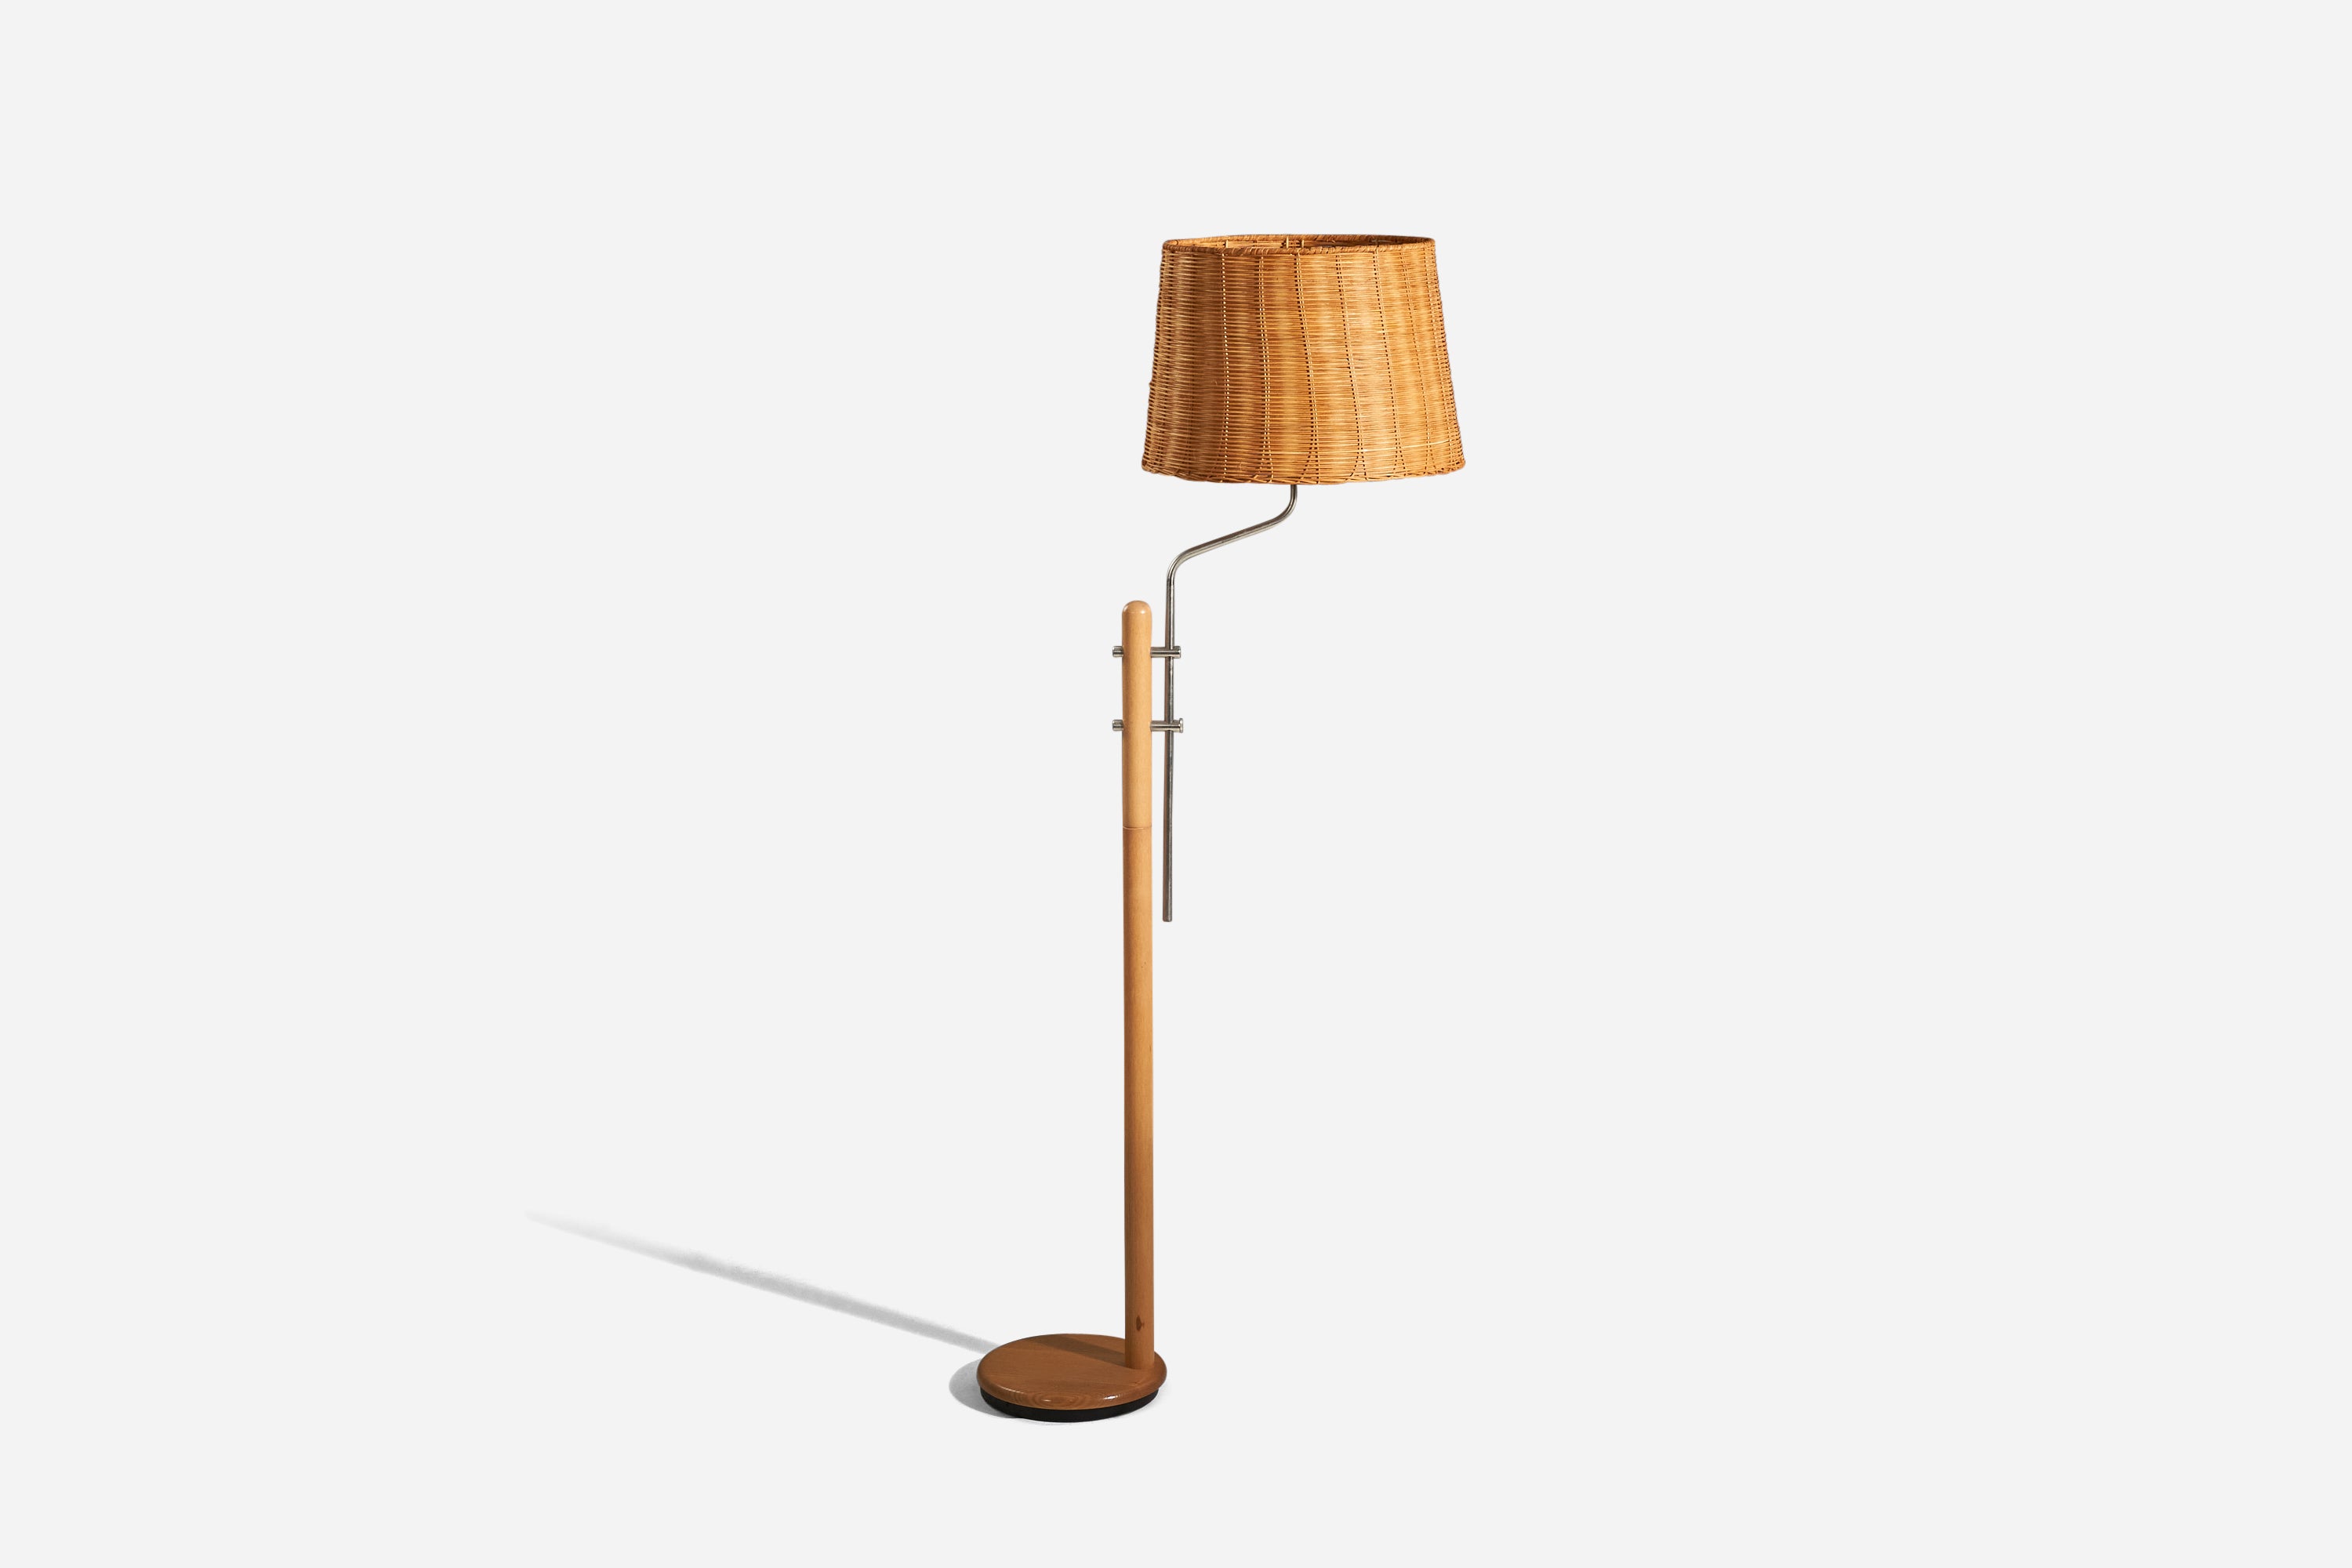 A wood, steel and rattan floor lamp designed and produced by a Swedish designer, Sweden, c. 1970s.

Sold with Lampshade. 
Dimensions stated refer to the floor lamp with the shade.
